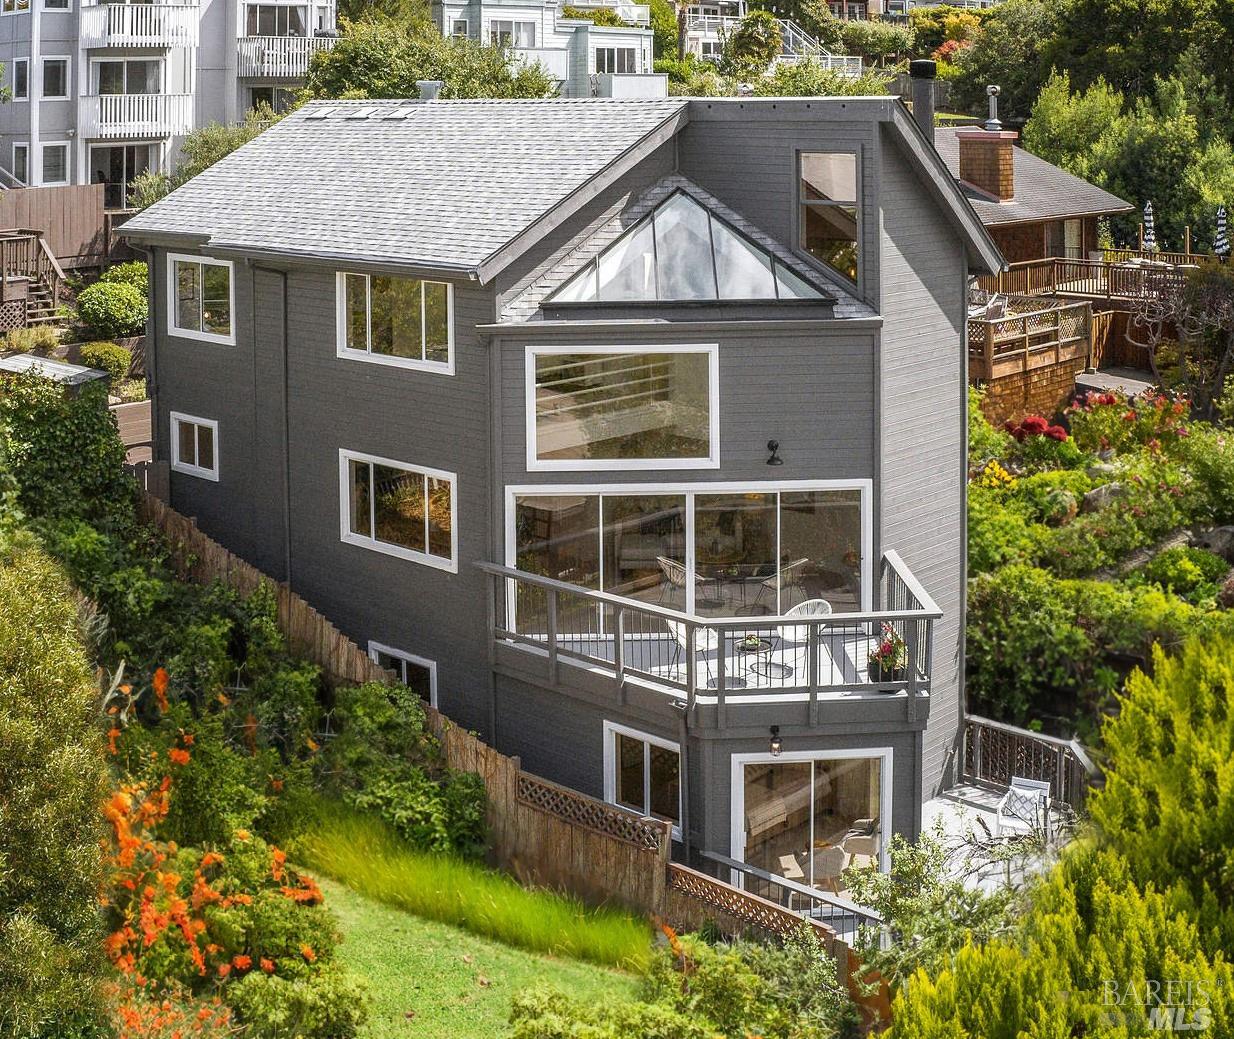 Photo of 509509A Easterby St in Sausalito, CA